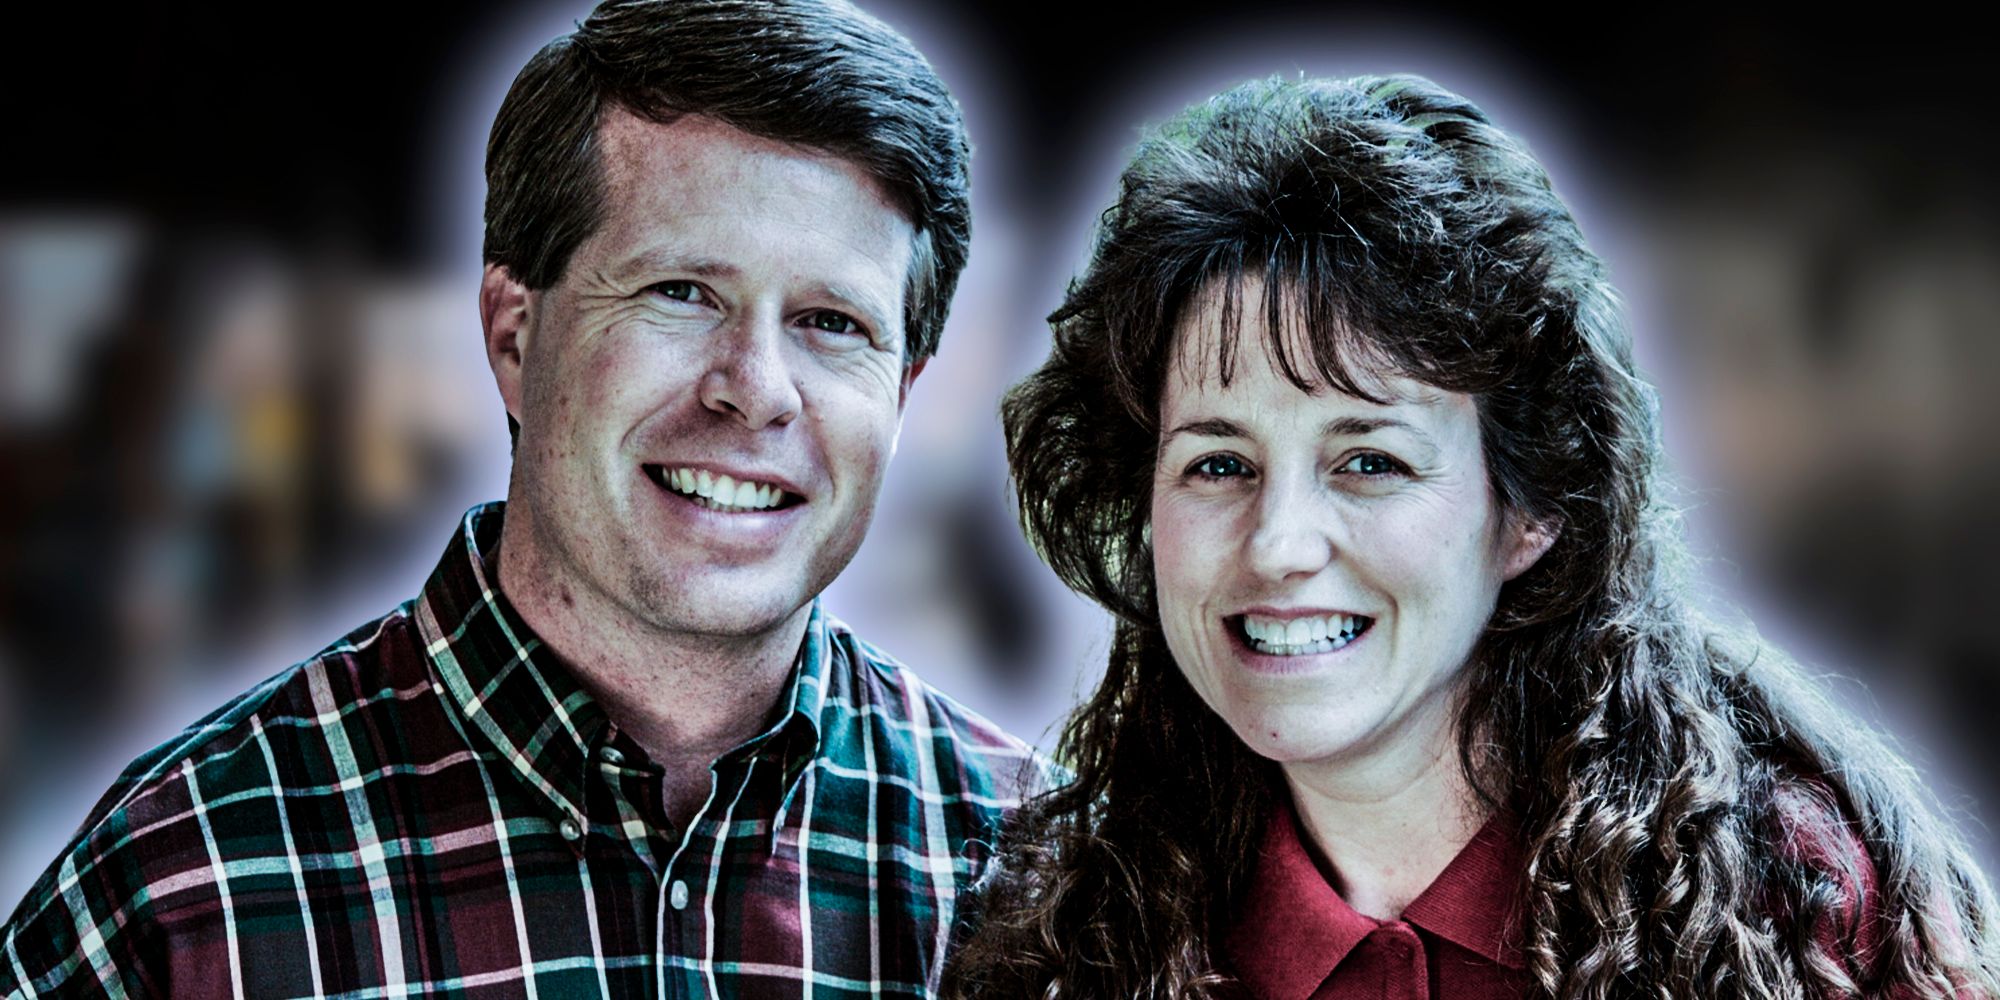 Jim Bob & Michelle Duggar 19 Kids and Counting